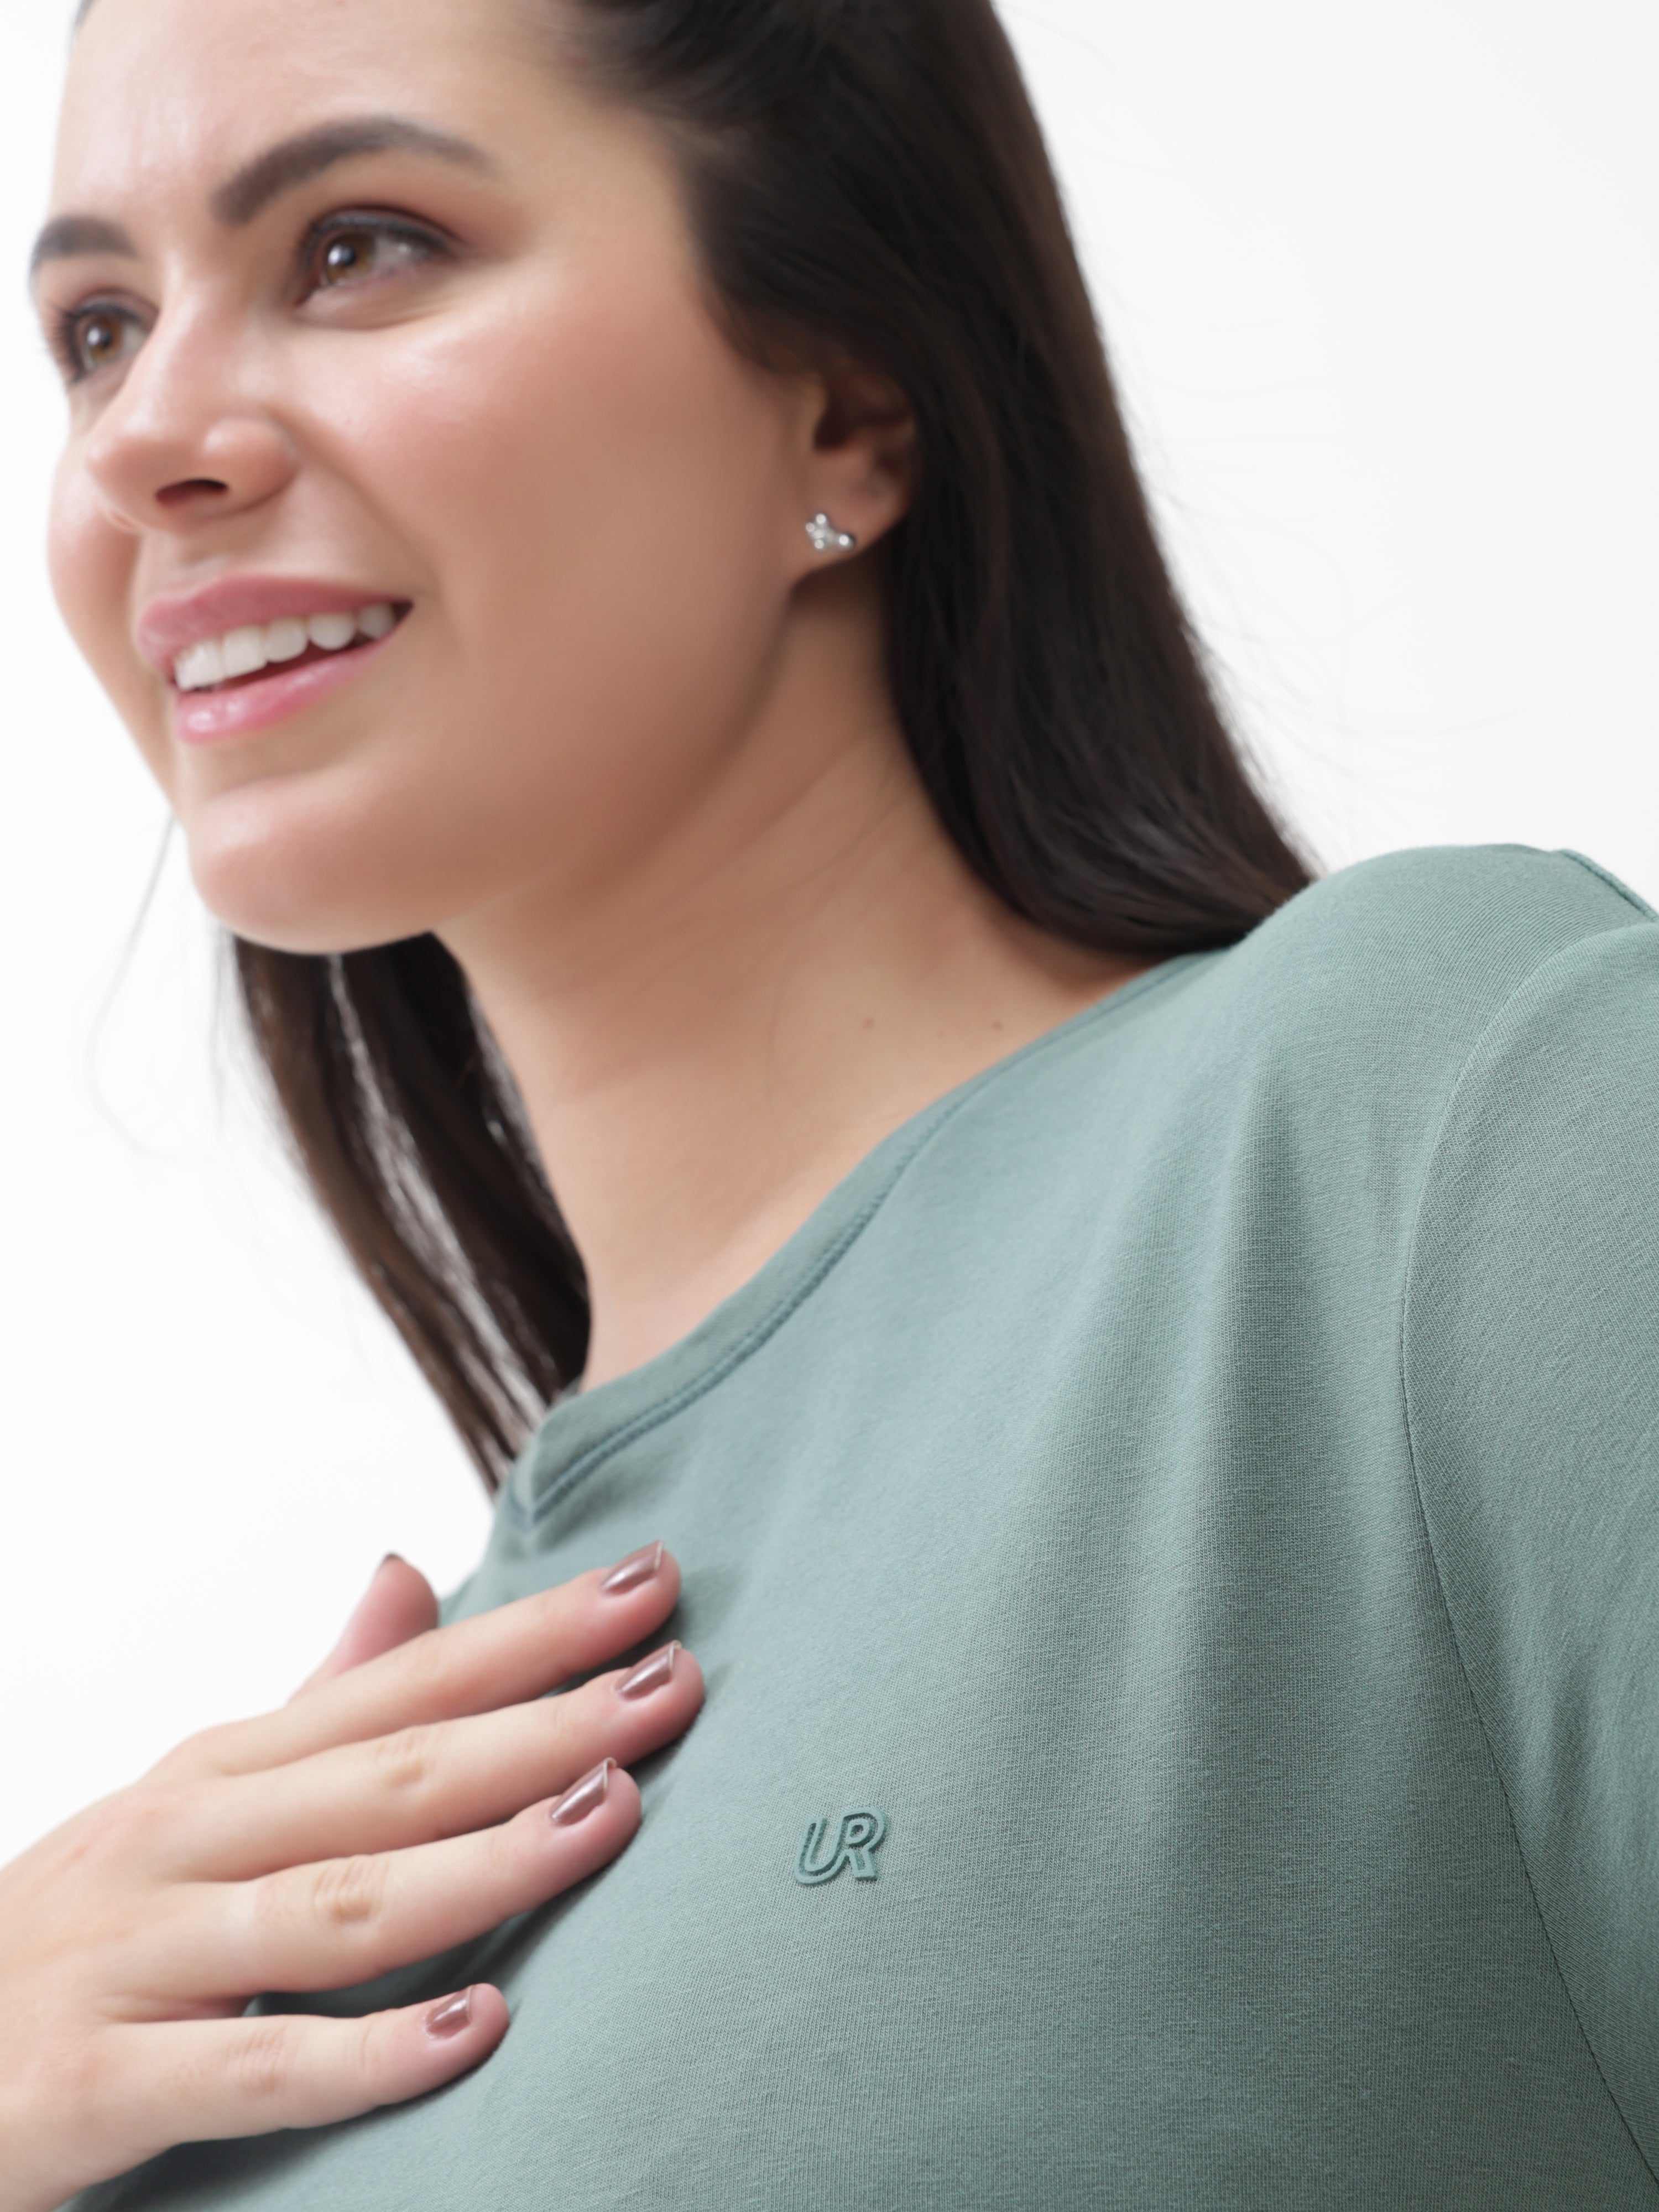 Woman wearing Simple Green Turms T-shirt with round neck and logo, showcasing tailored fit and stylish design against a white background.